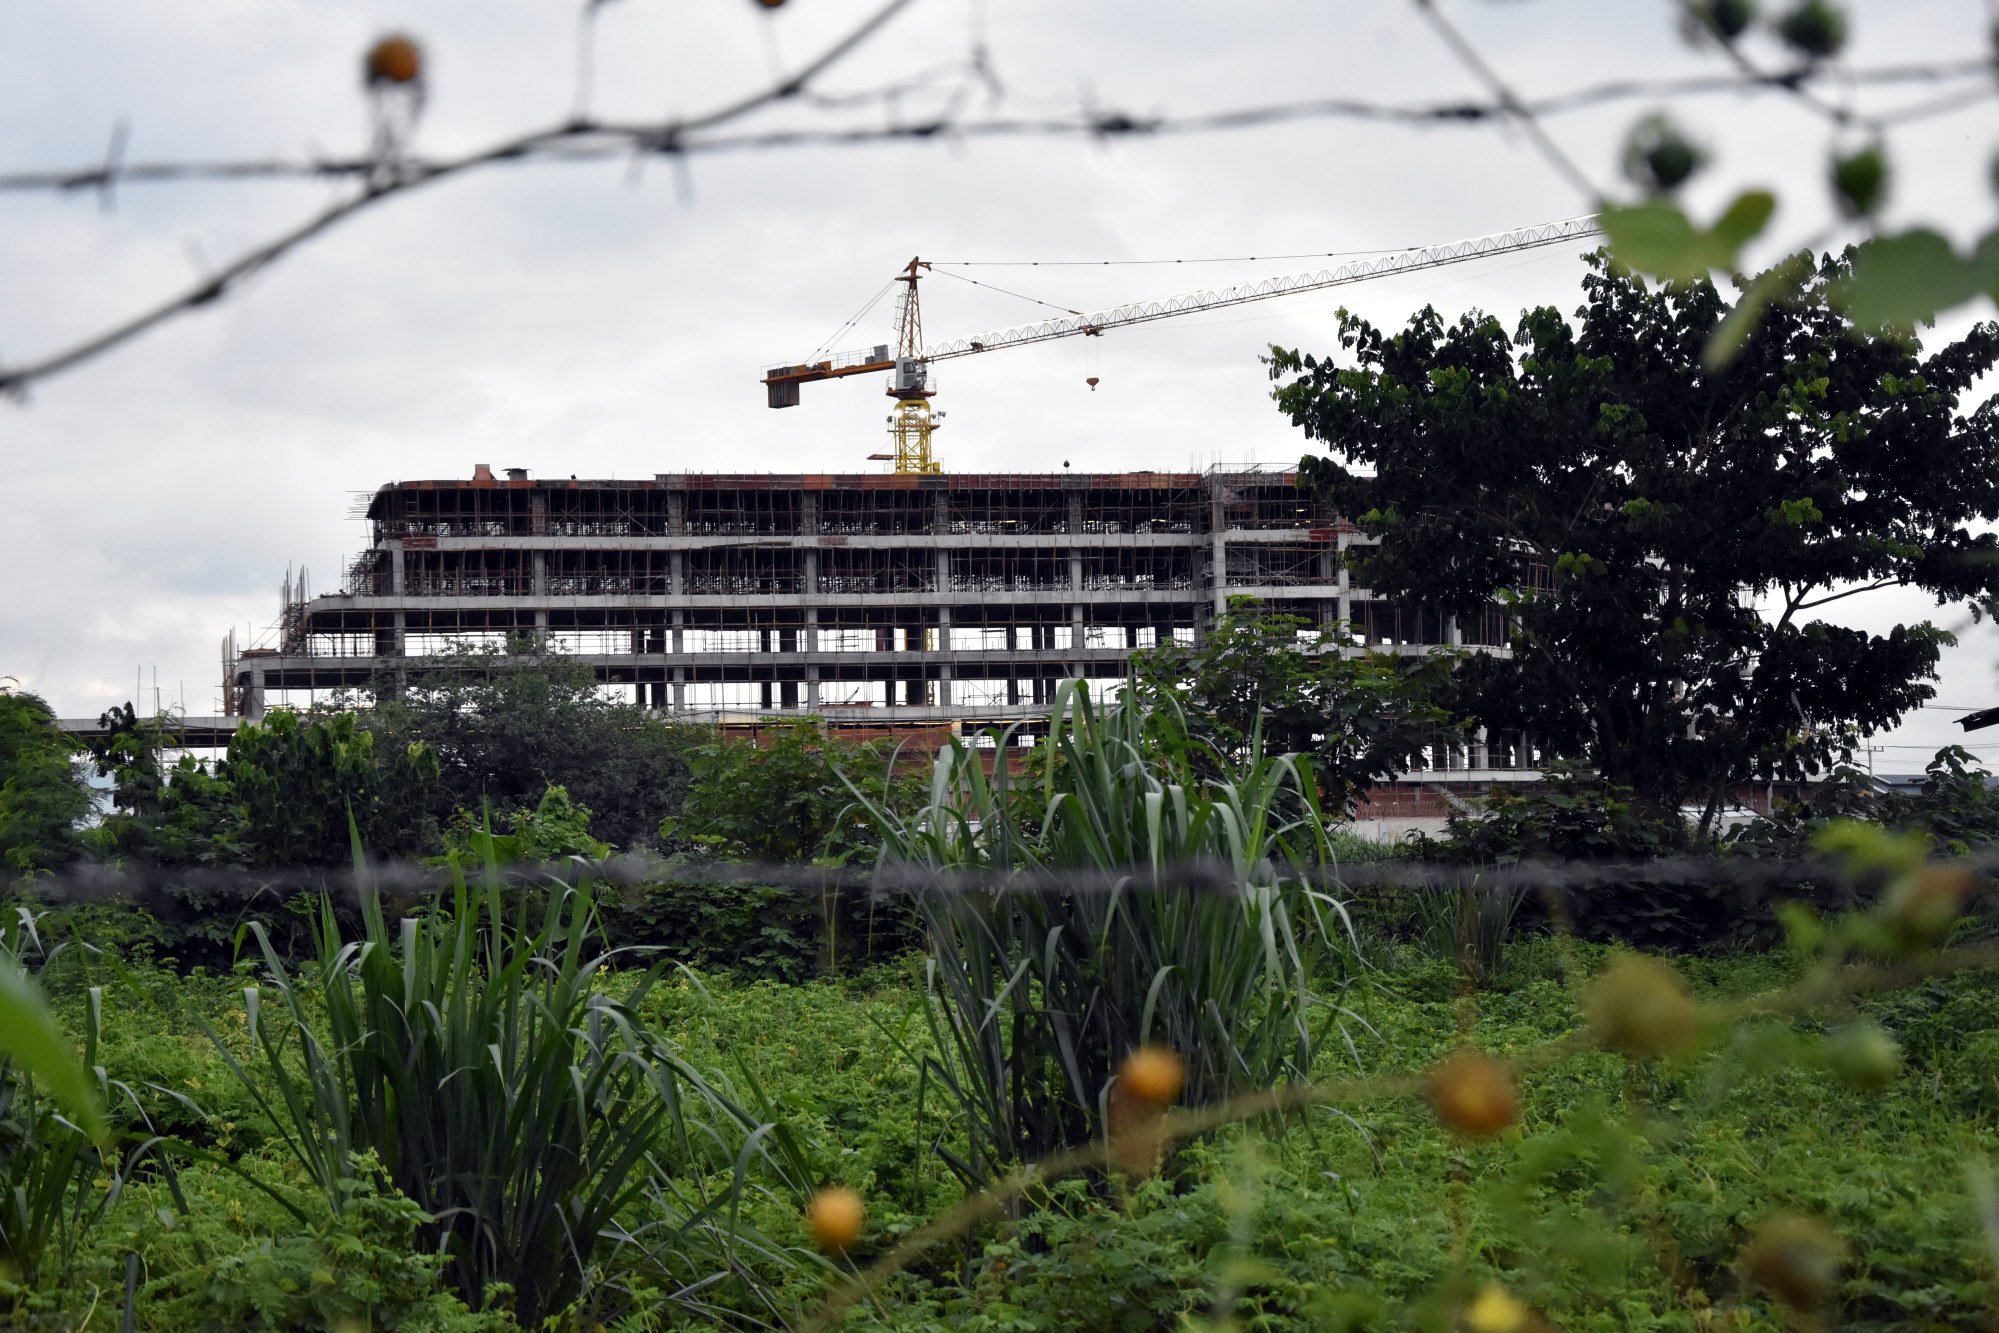 A new building is seen under construction at the KKII (Dong Feng) compound of KK Park in Myanmar on July 1. Photo: Alastair McCready